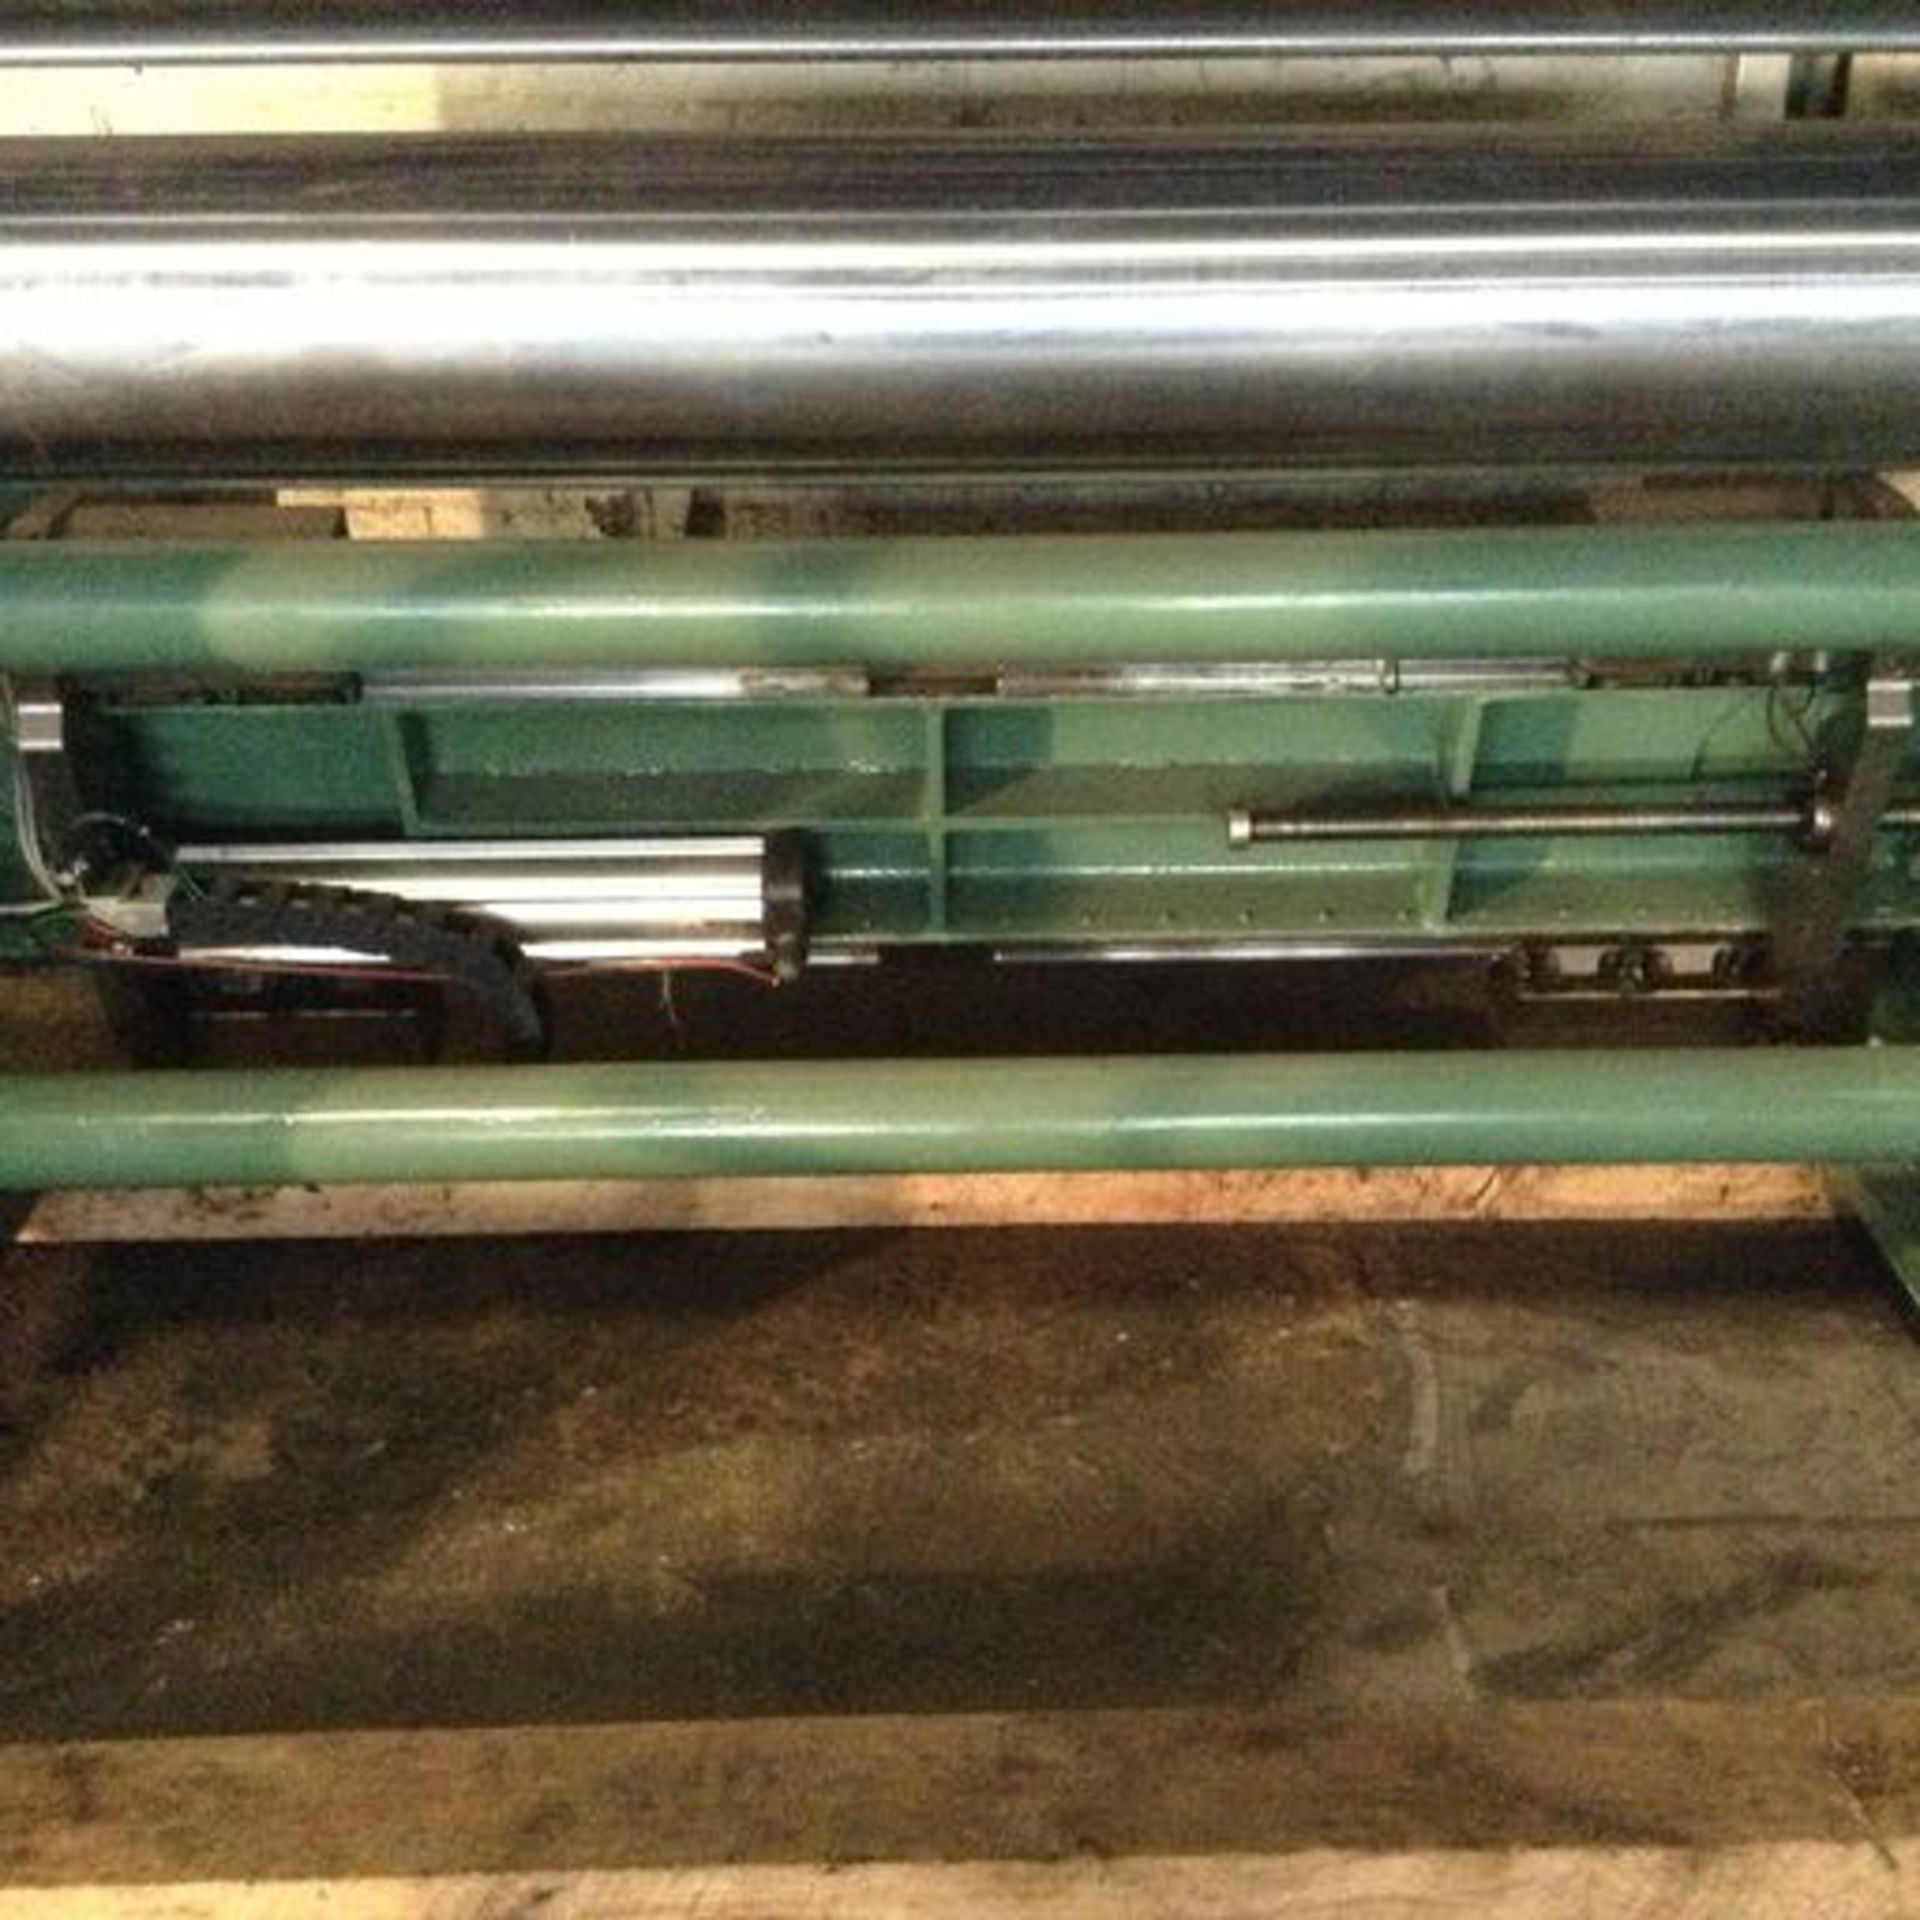 63” Nordmeccanica 4-roll, chill roll / heat roll system. Age 2005. 64” wide idlers. This chill - Image 12 of 20